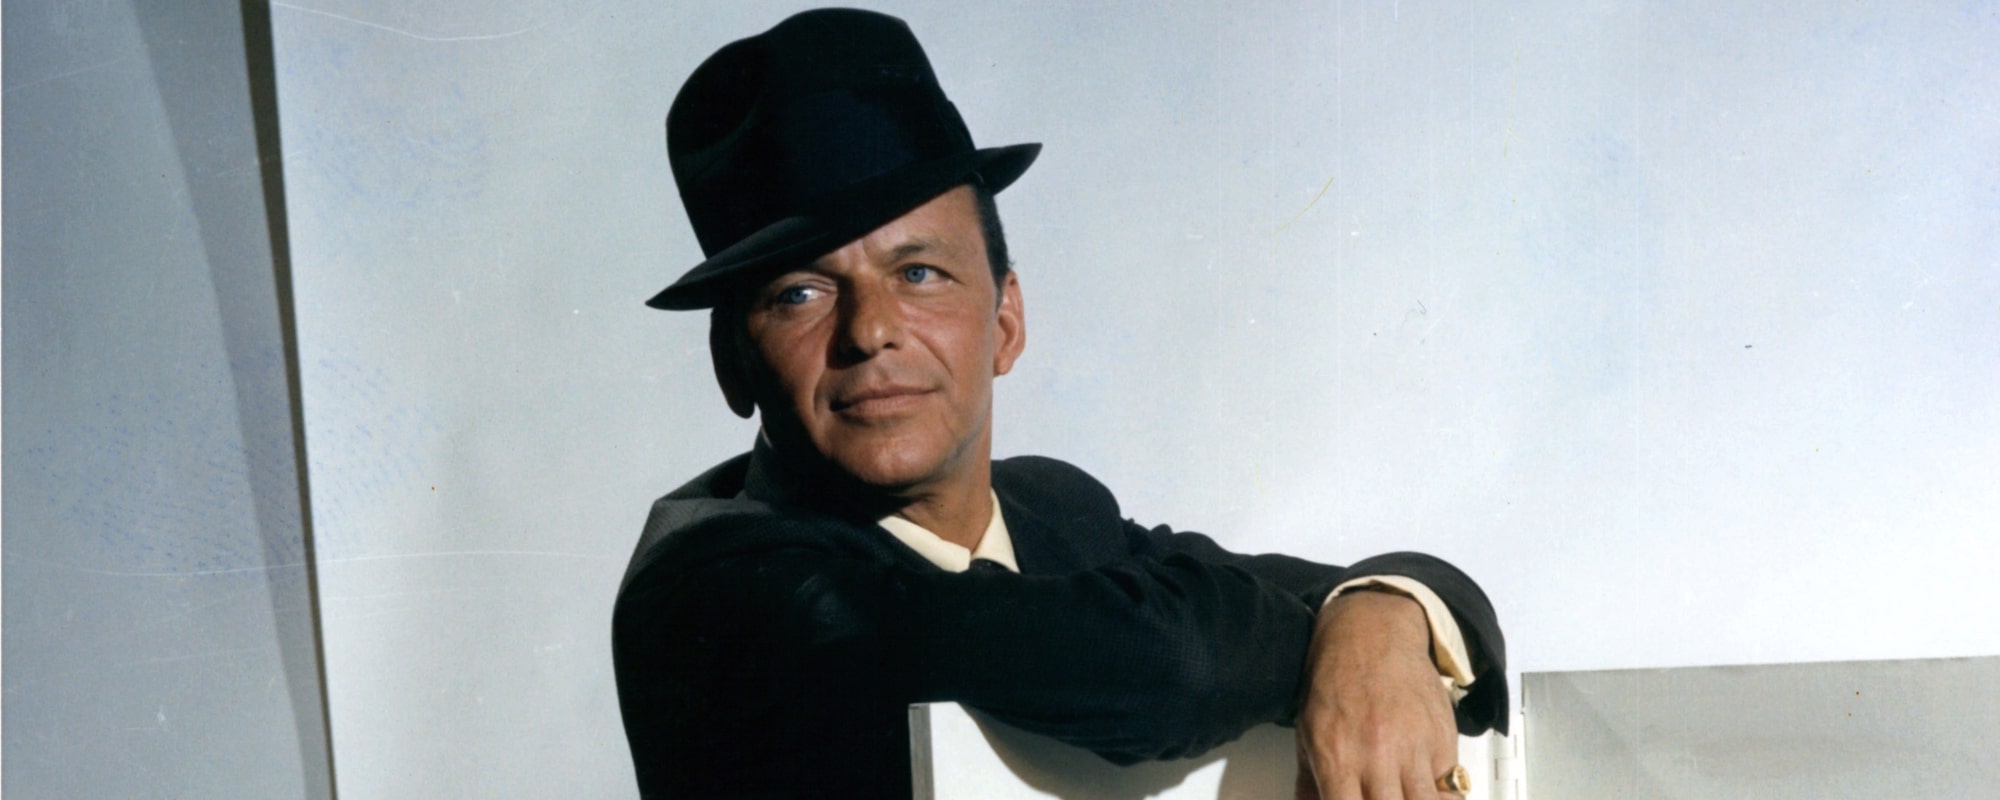 Frank Sinatra Returns to the Hot 100’s Top 20 with “Jingle Bells” Just in Time for Christmas